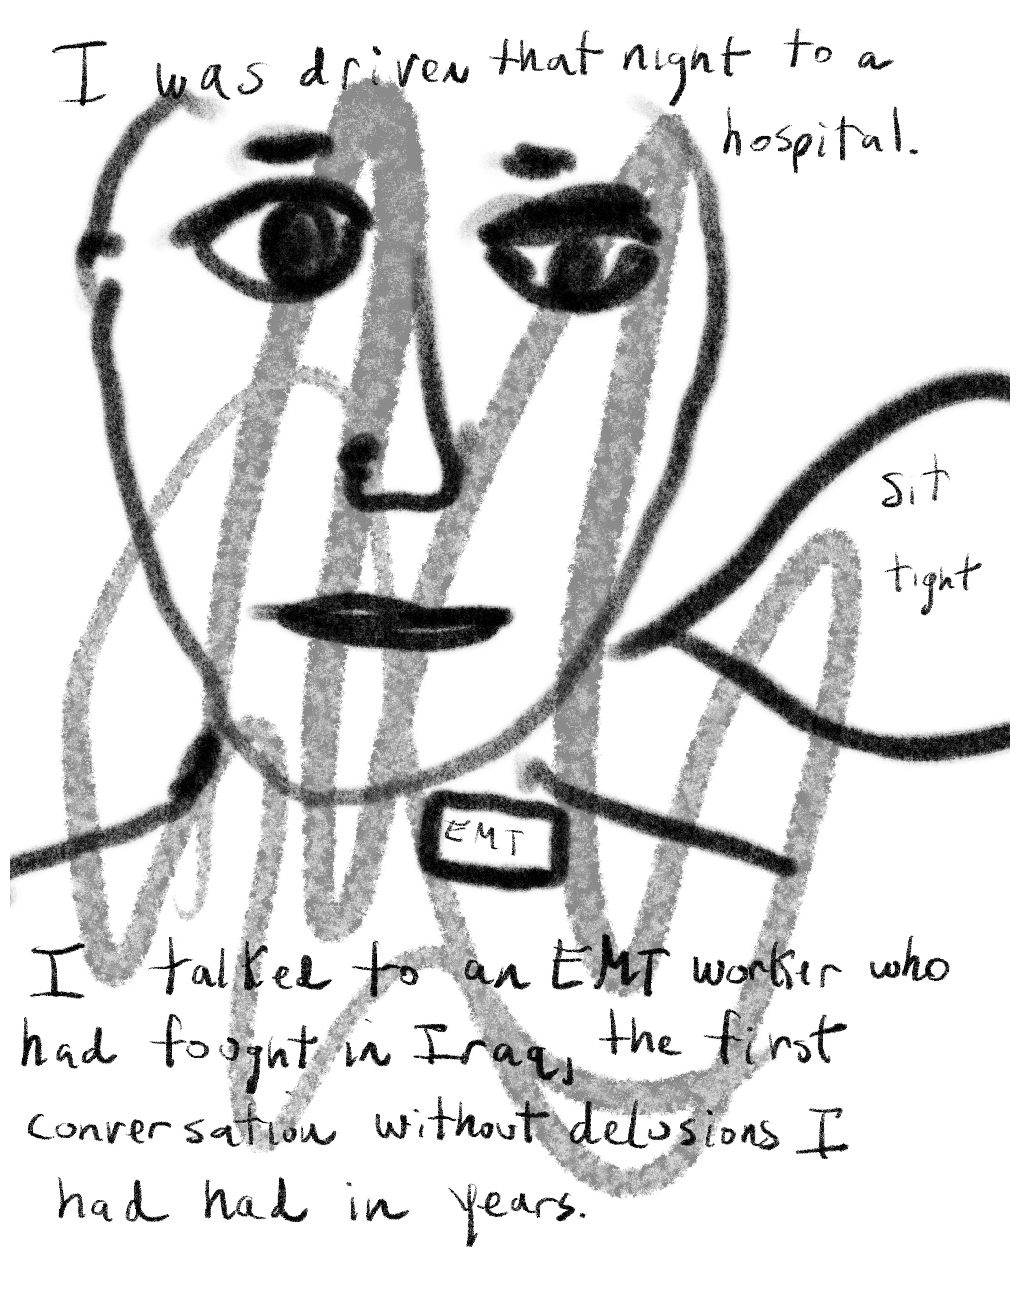 Panel one of a four-panel comic called 'From psychotic to patient', consisting of thick black line drawing and hand written text against a white background. The head and shoulders of a figure with large eyes and a neutral expression fills most of the panel. A small label on the figure's chest says "EMT". A speech bubble from figure says "Sit tight".Text  at the top of panel reads "I was driven that night to a hospital" and text below the figure at the bottom of the panel reads "I talked to an EMT worker who had fought in Iraq, the first conversation without delusions I had had in years."